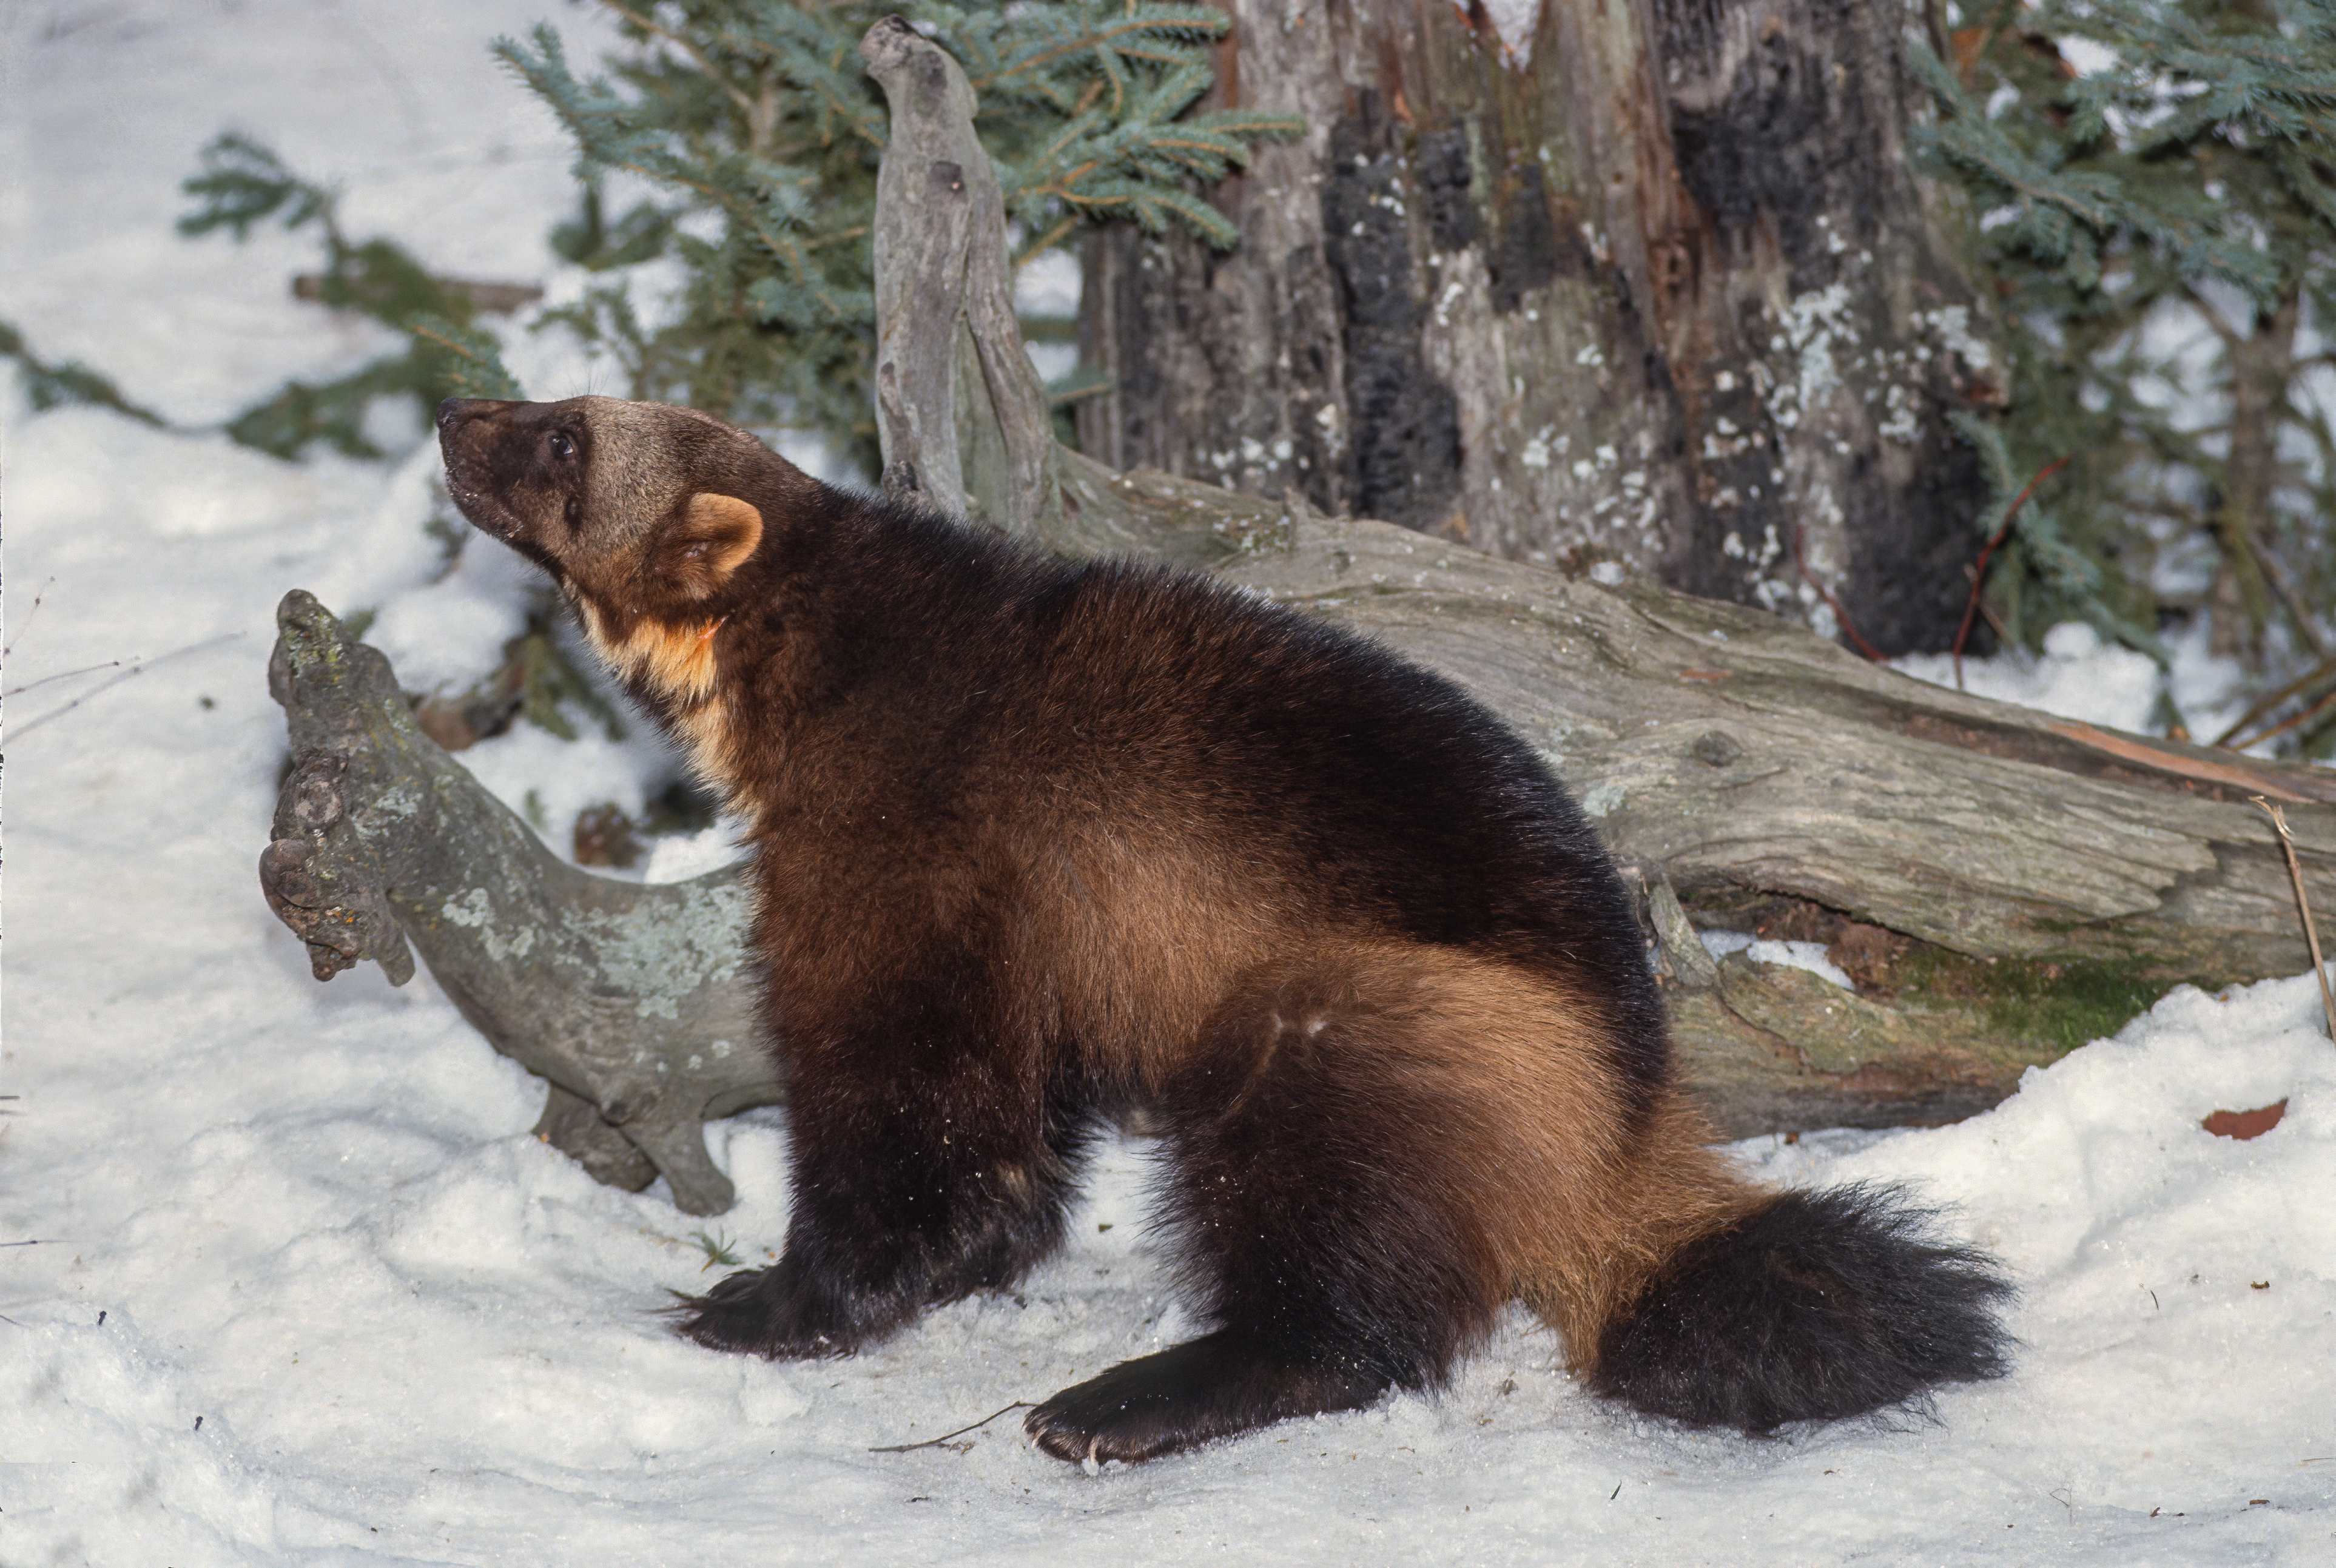 A wolverine will eat almost anything